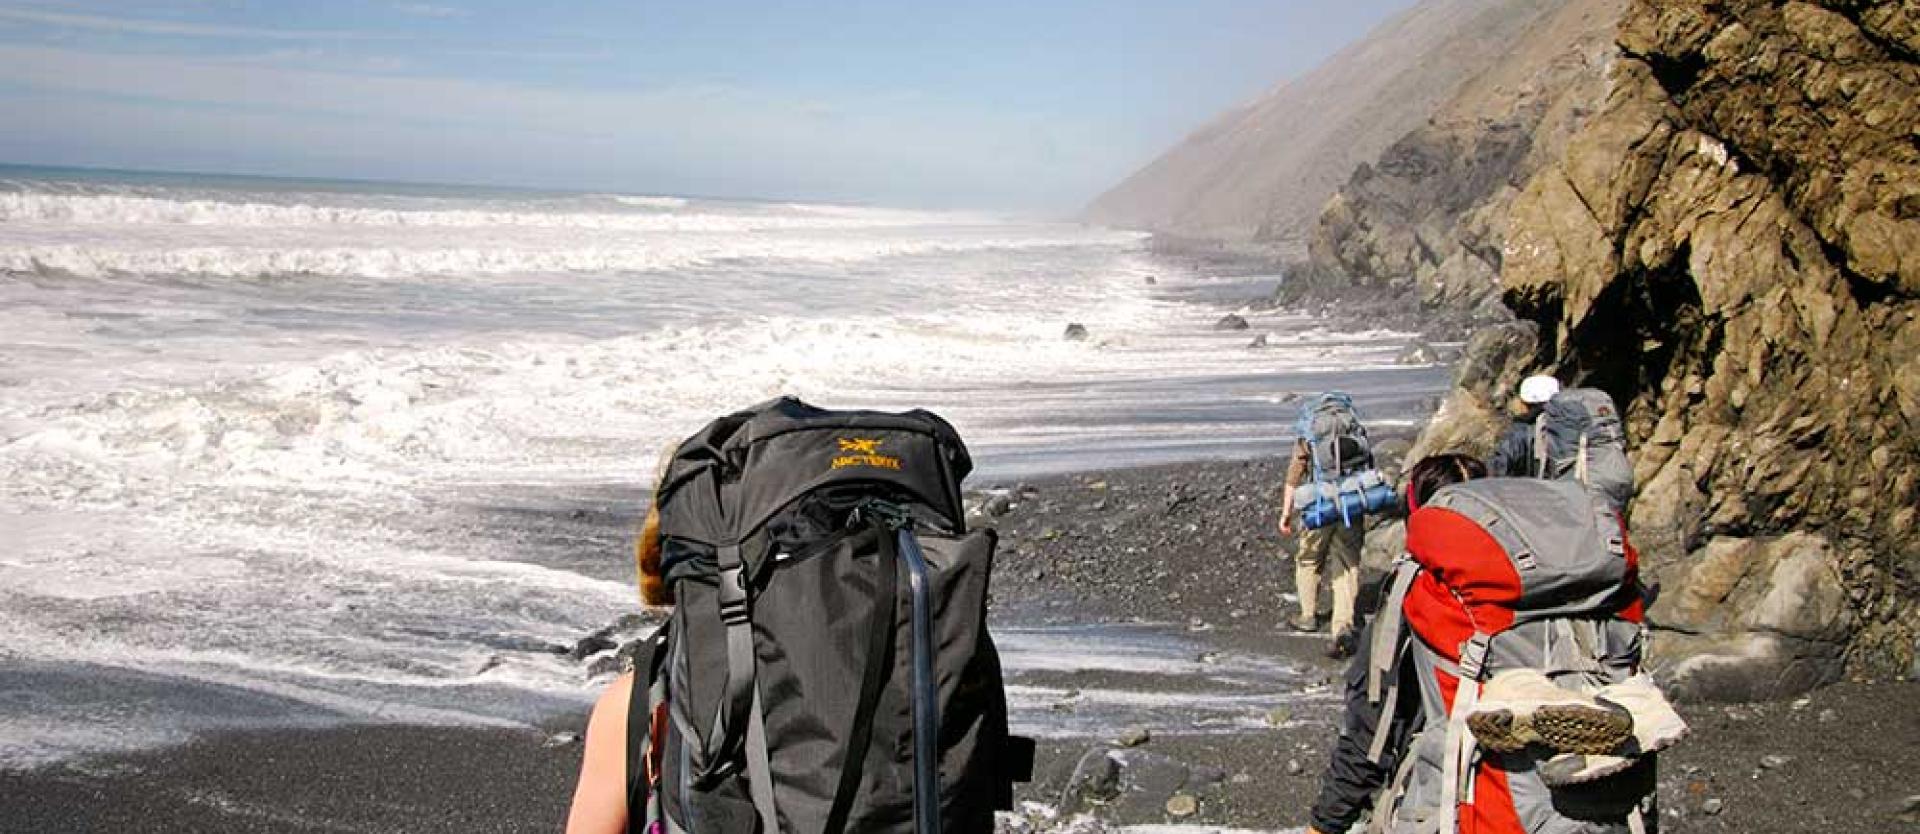 Backpacking the Lost Coast